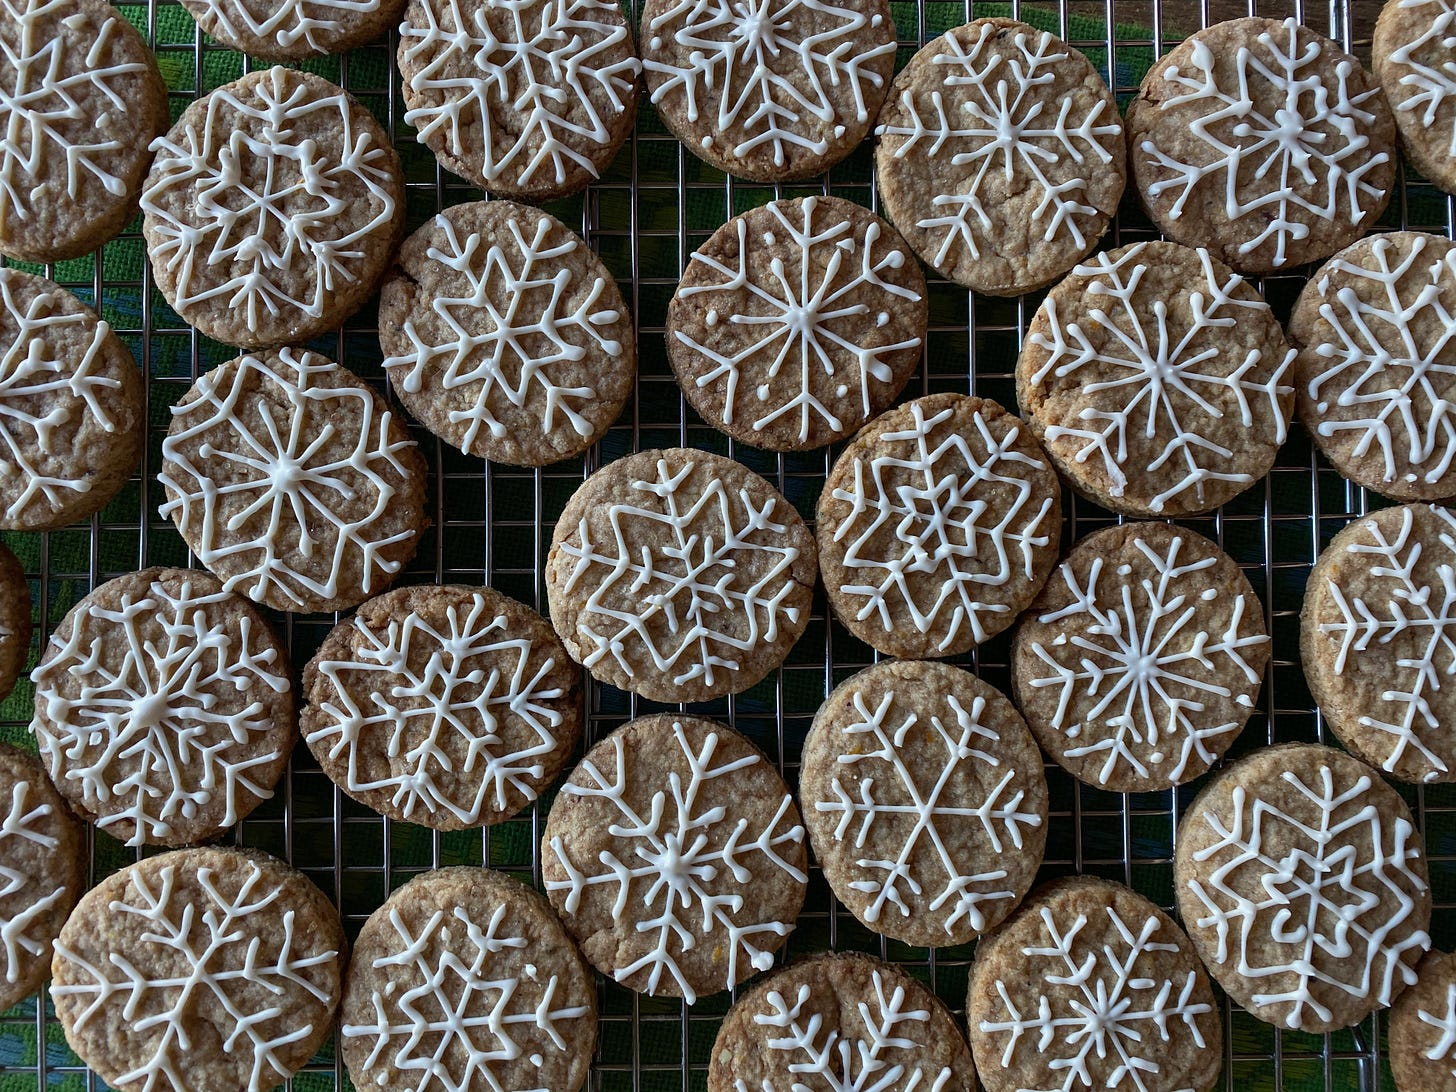 Many round golden brown cookies sit on a metal cooling rack. They are intricately decorated in white icing with different snowflake patterns.